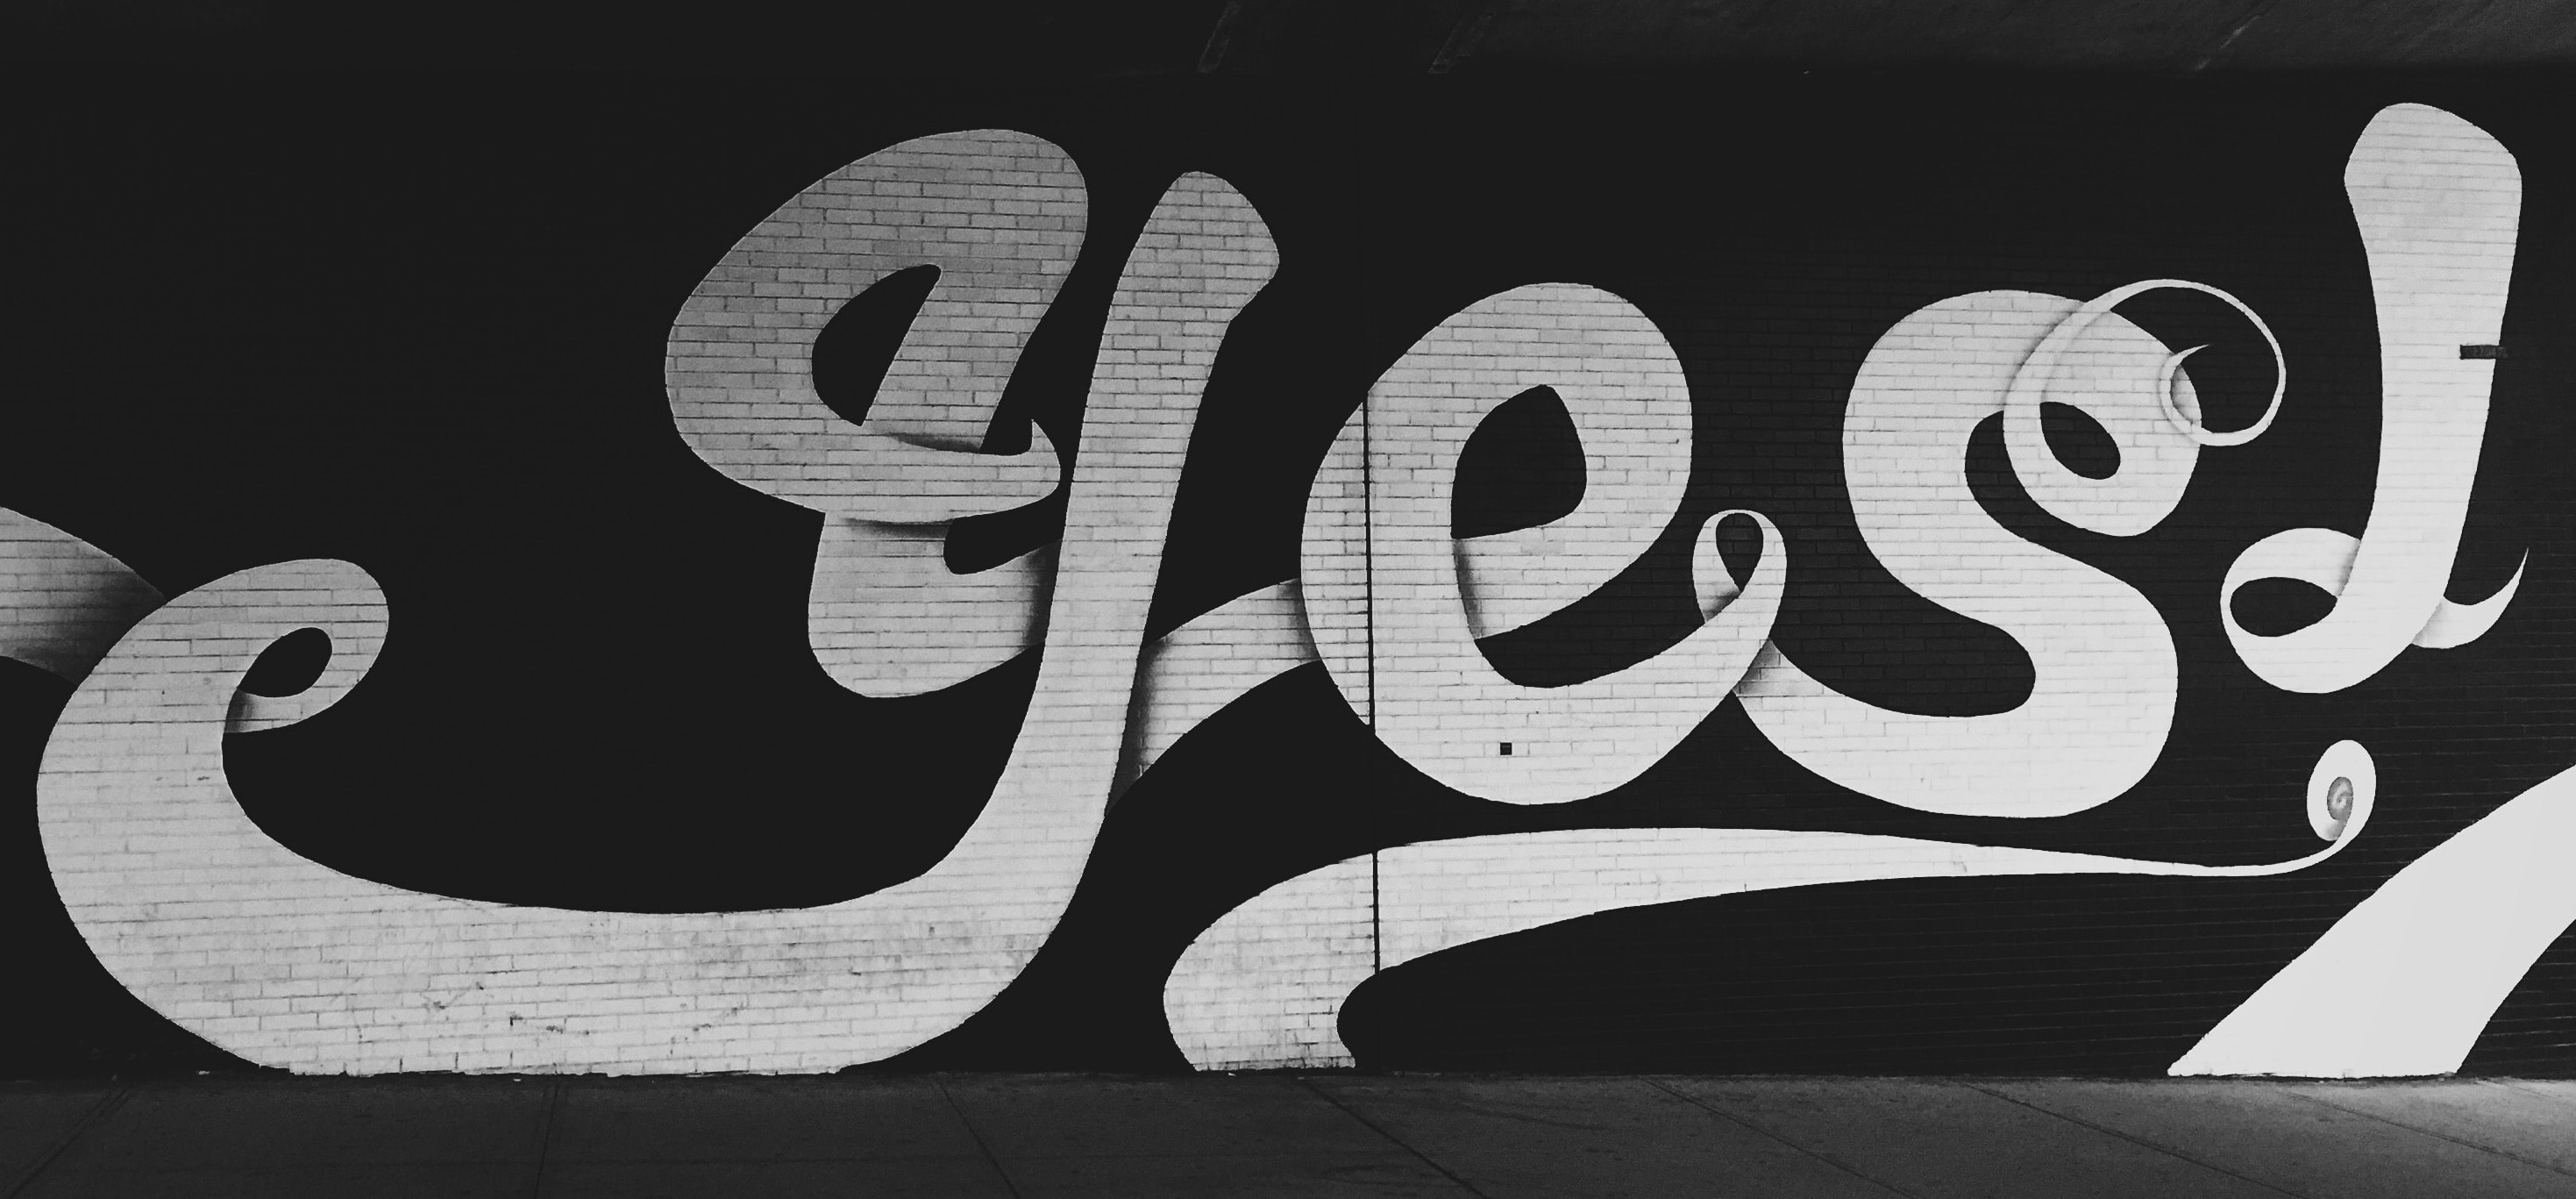 "yes!" painted in white swirly text on a black brick wall